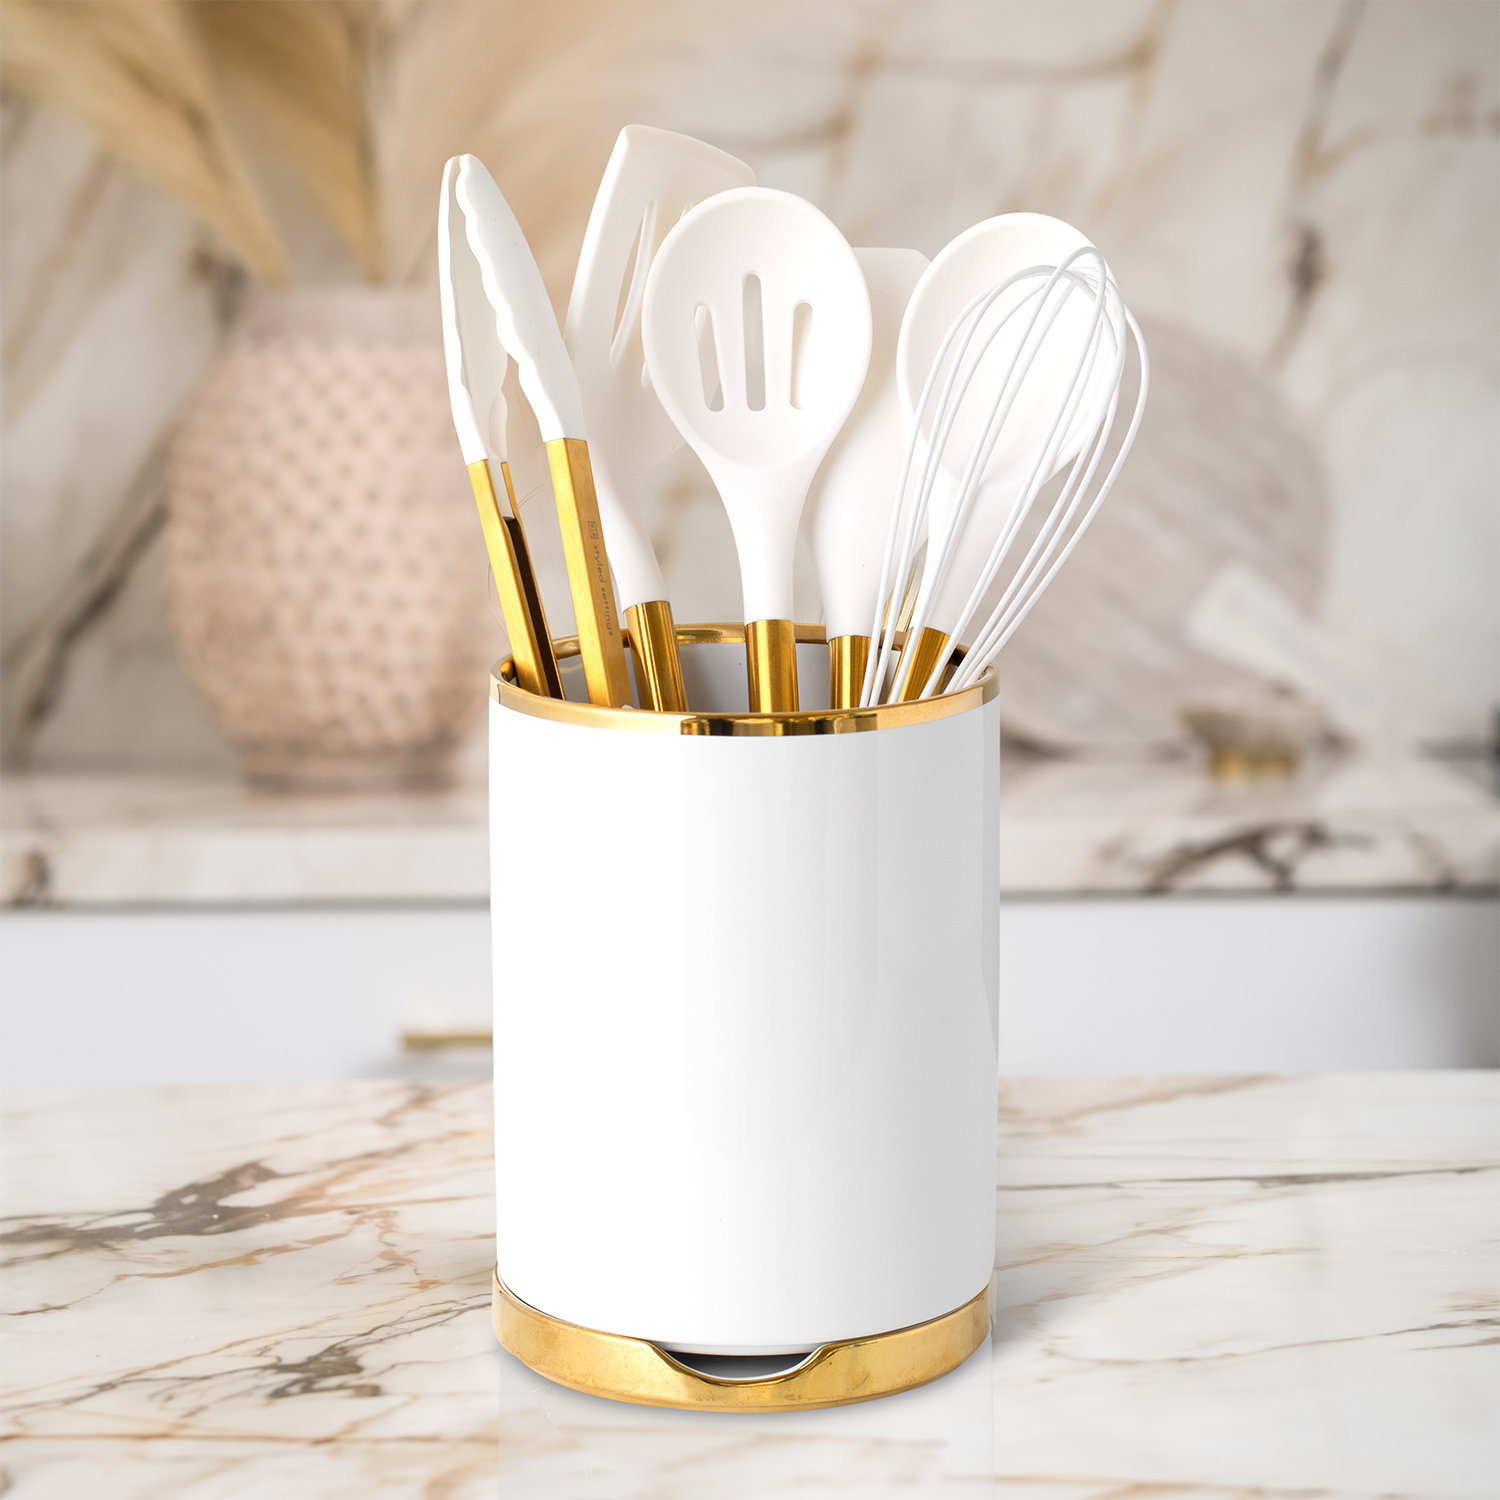 White and Gold Utensil Holder with Built-in Spoon Rest - Styled Settings